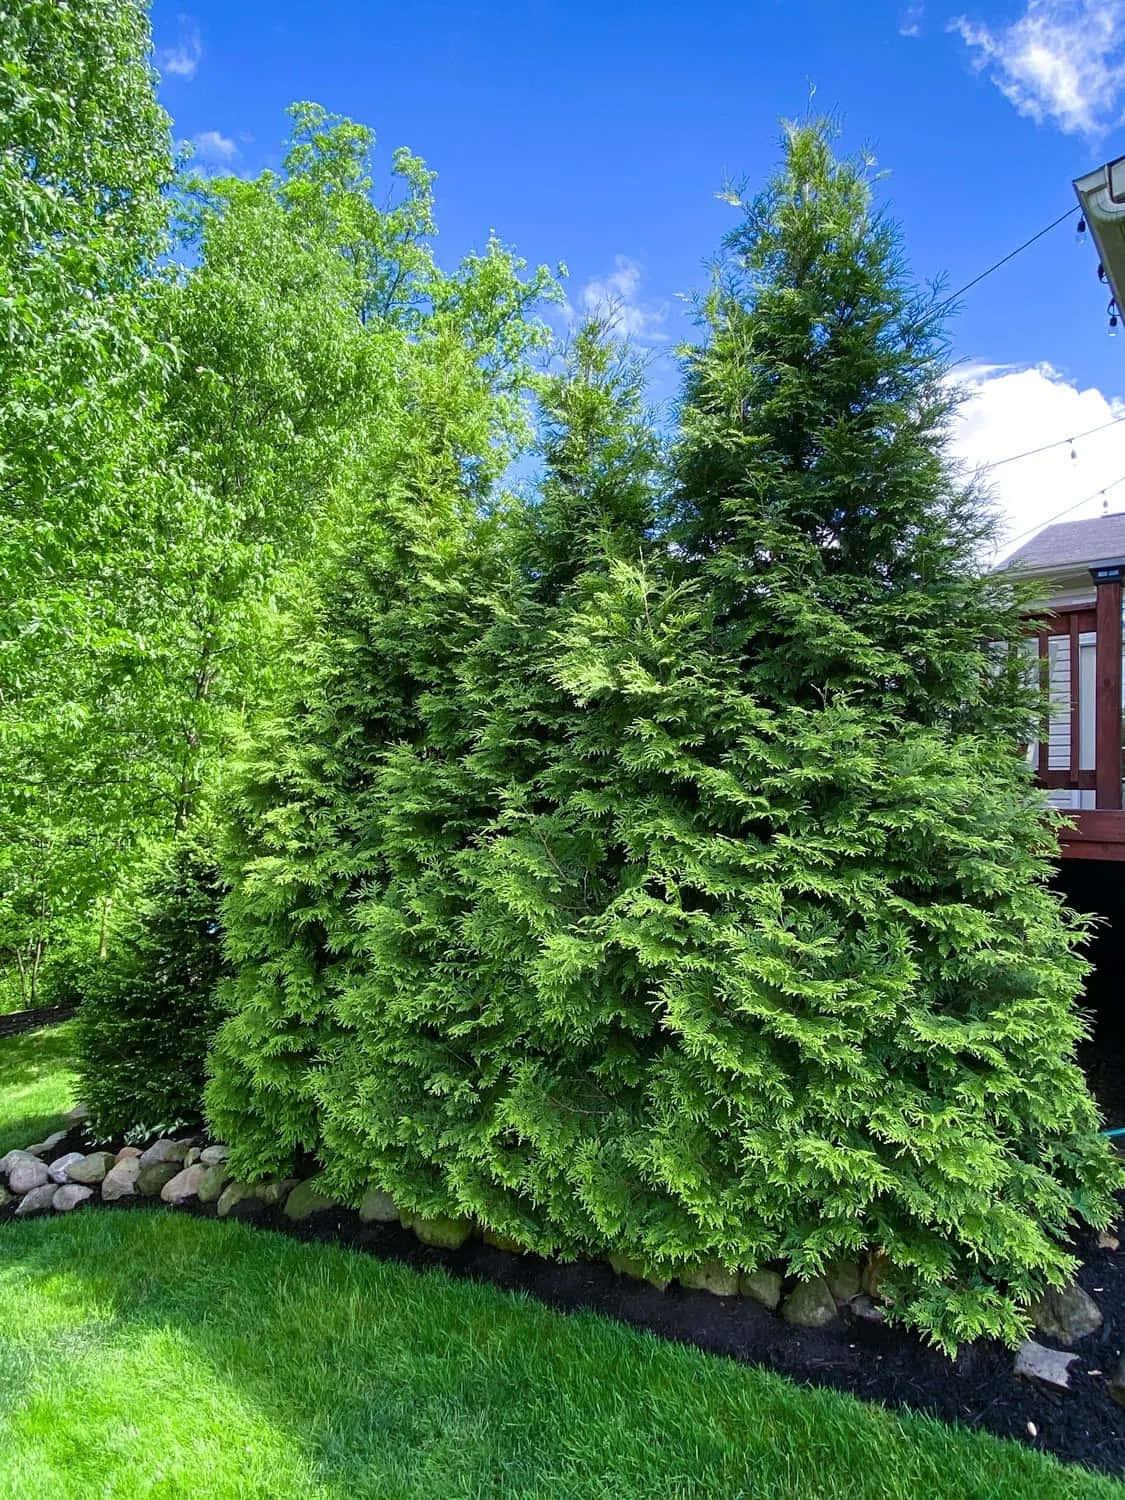 A Large Tree In The Yard With A Deck